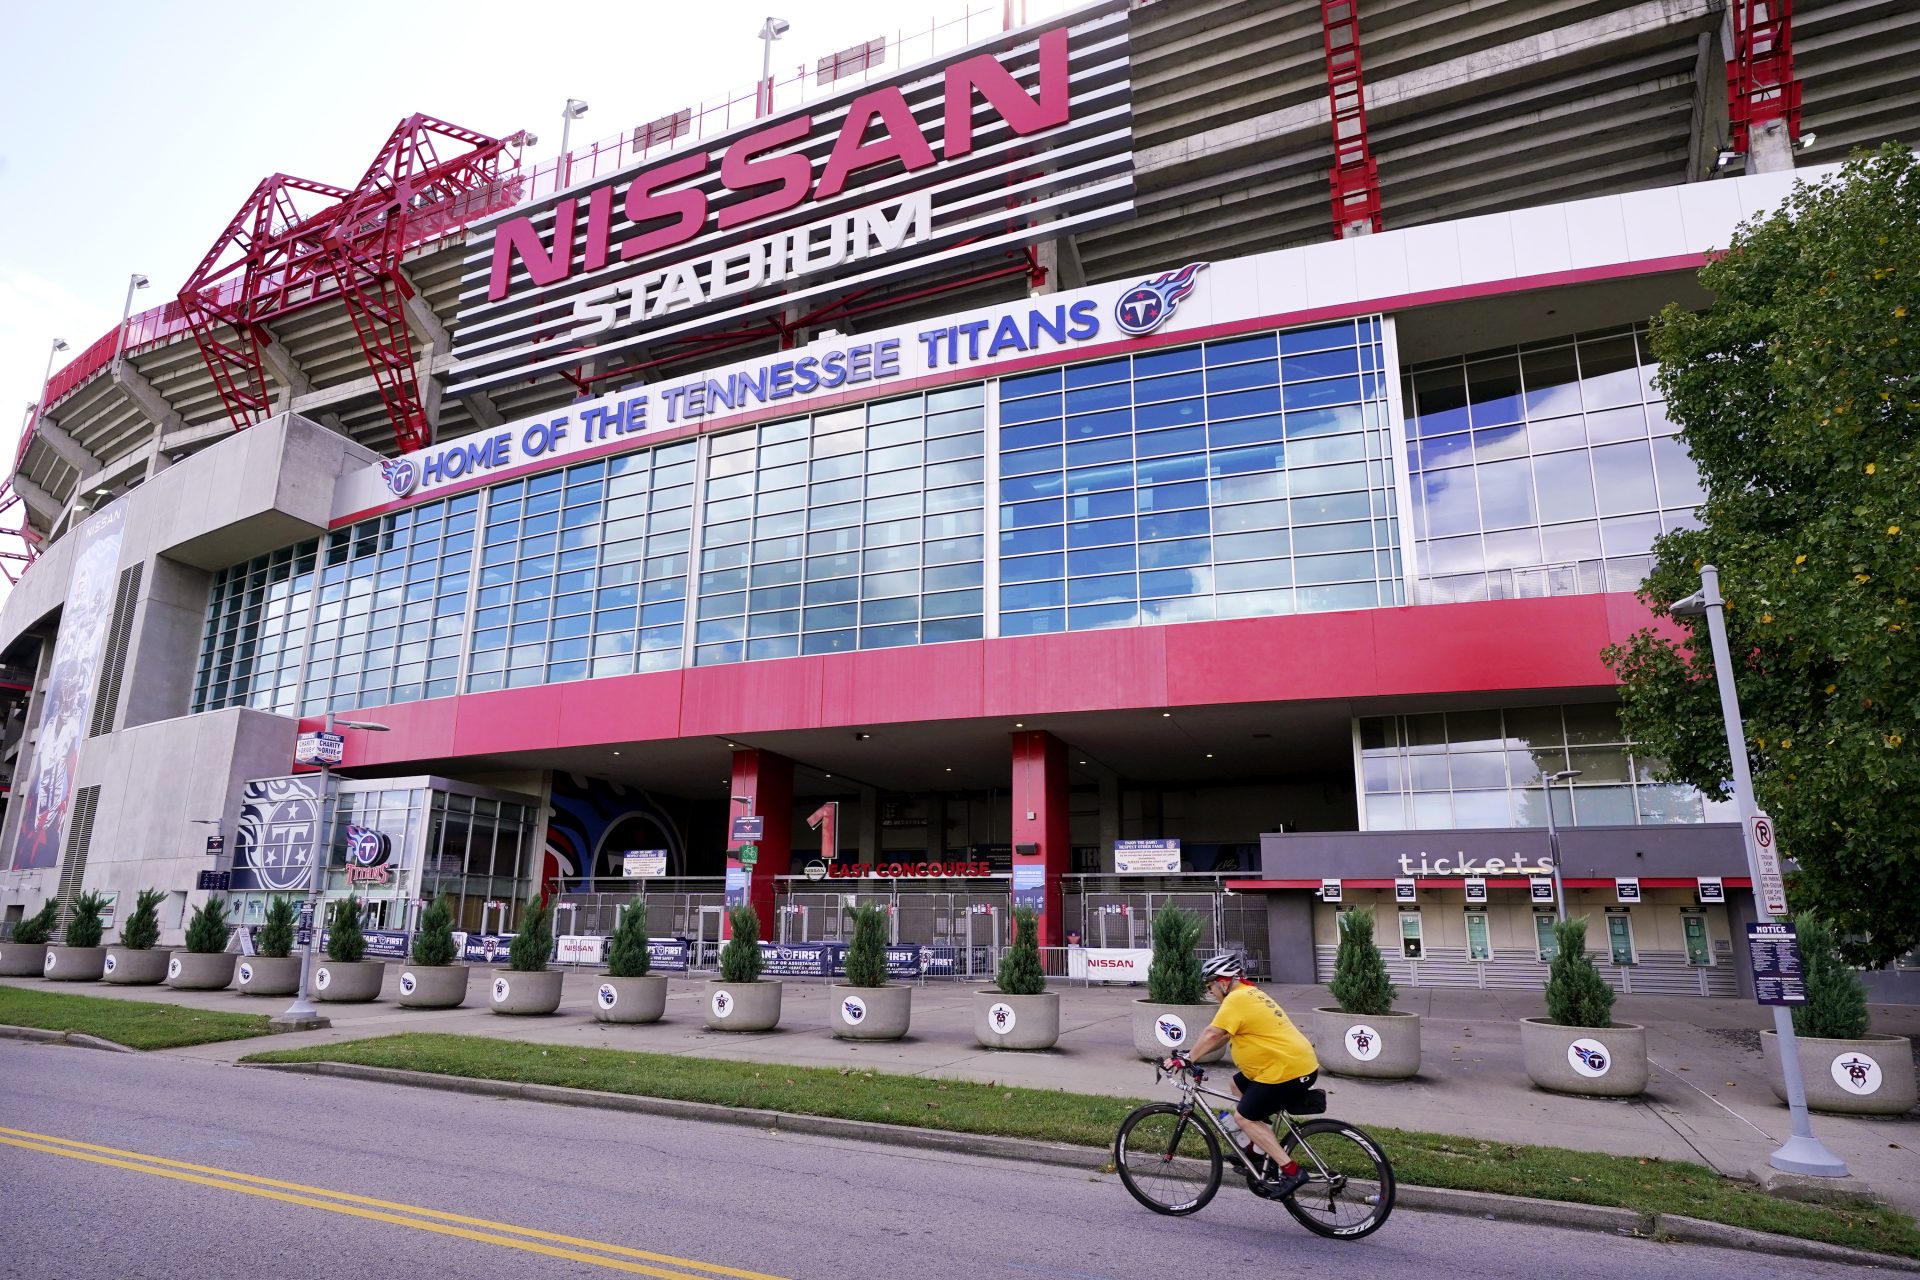 A cyclist passes by Nissan Stadium, home of the Tennessee Titans, Tuesday, Sept. 29, 2020, in Nashville, Tenn. The Titans suspended in-person activities through Friday after the NFL says three Titans players and five personnel tested positive for the coronavirus, becoming the first COVID-19 outbreak of the NFL season in Week 4.